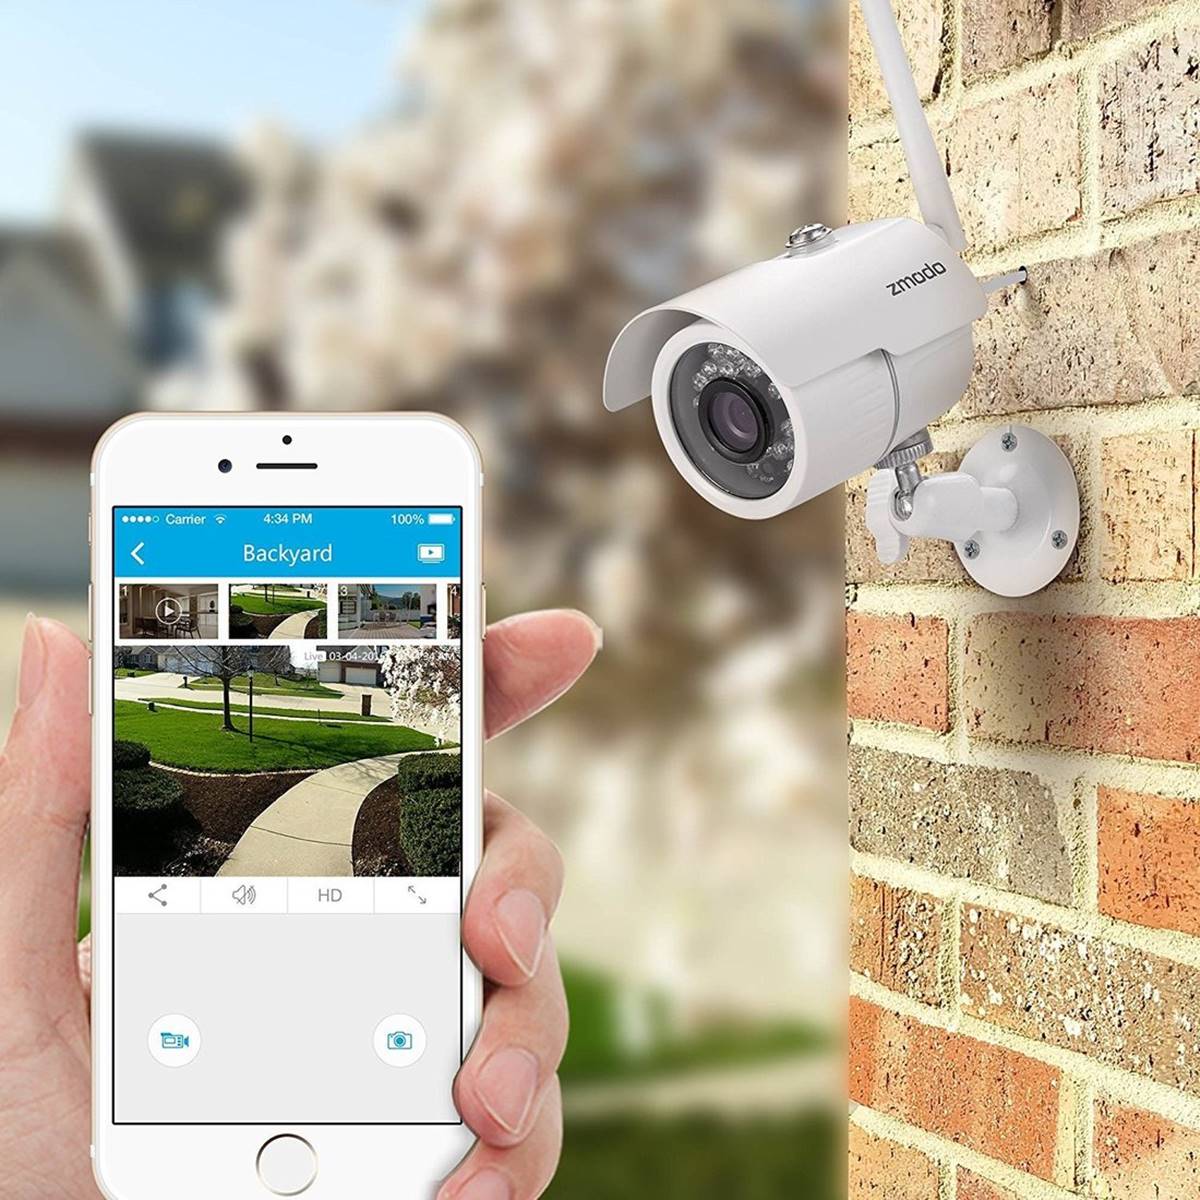 How Can I Monitor My Wired Security Cameras From Bunker Hill On My iPhone